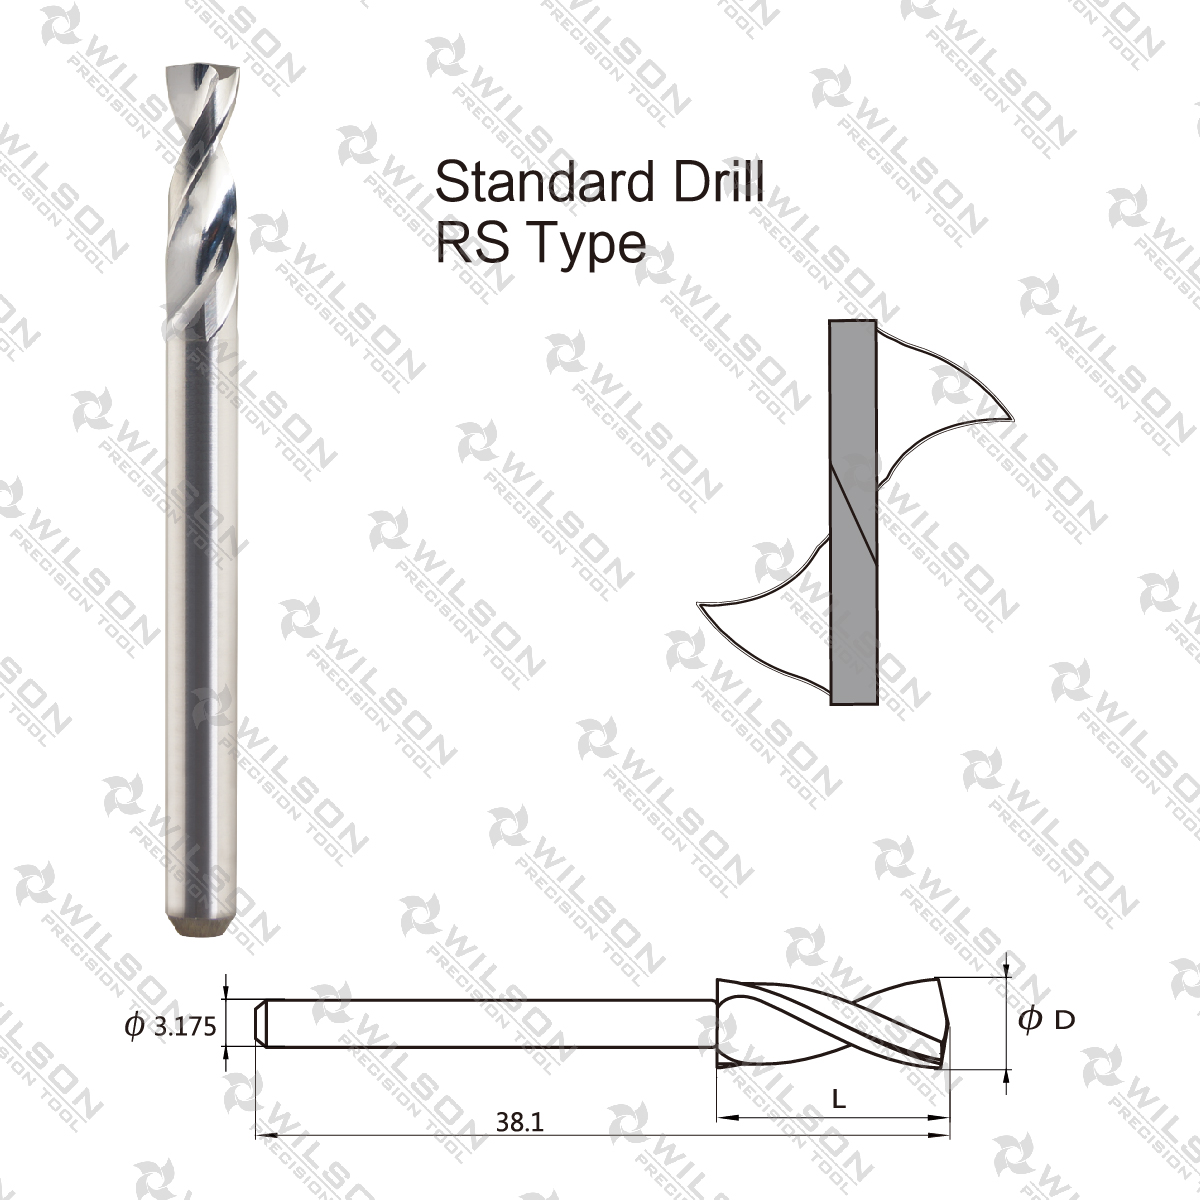 Standard Drill - RS Type